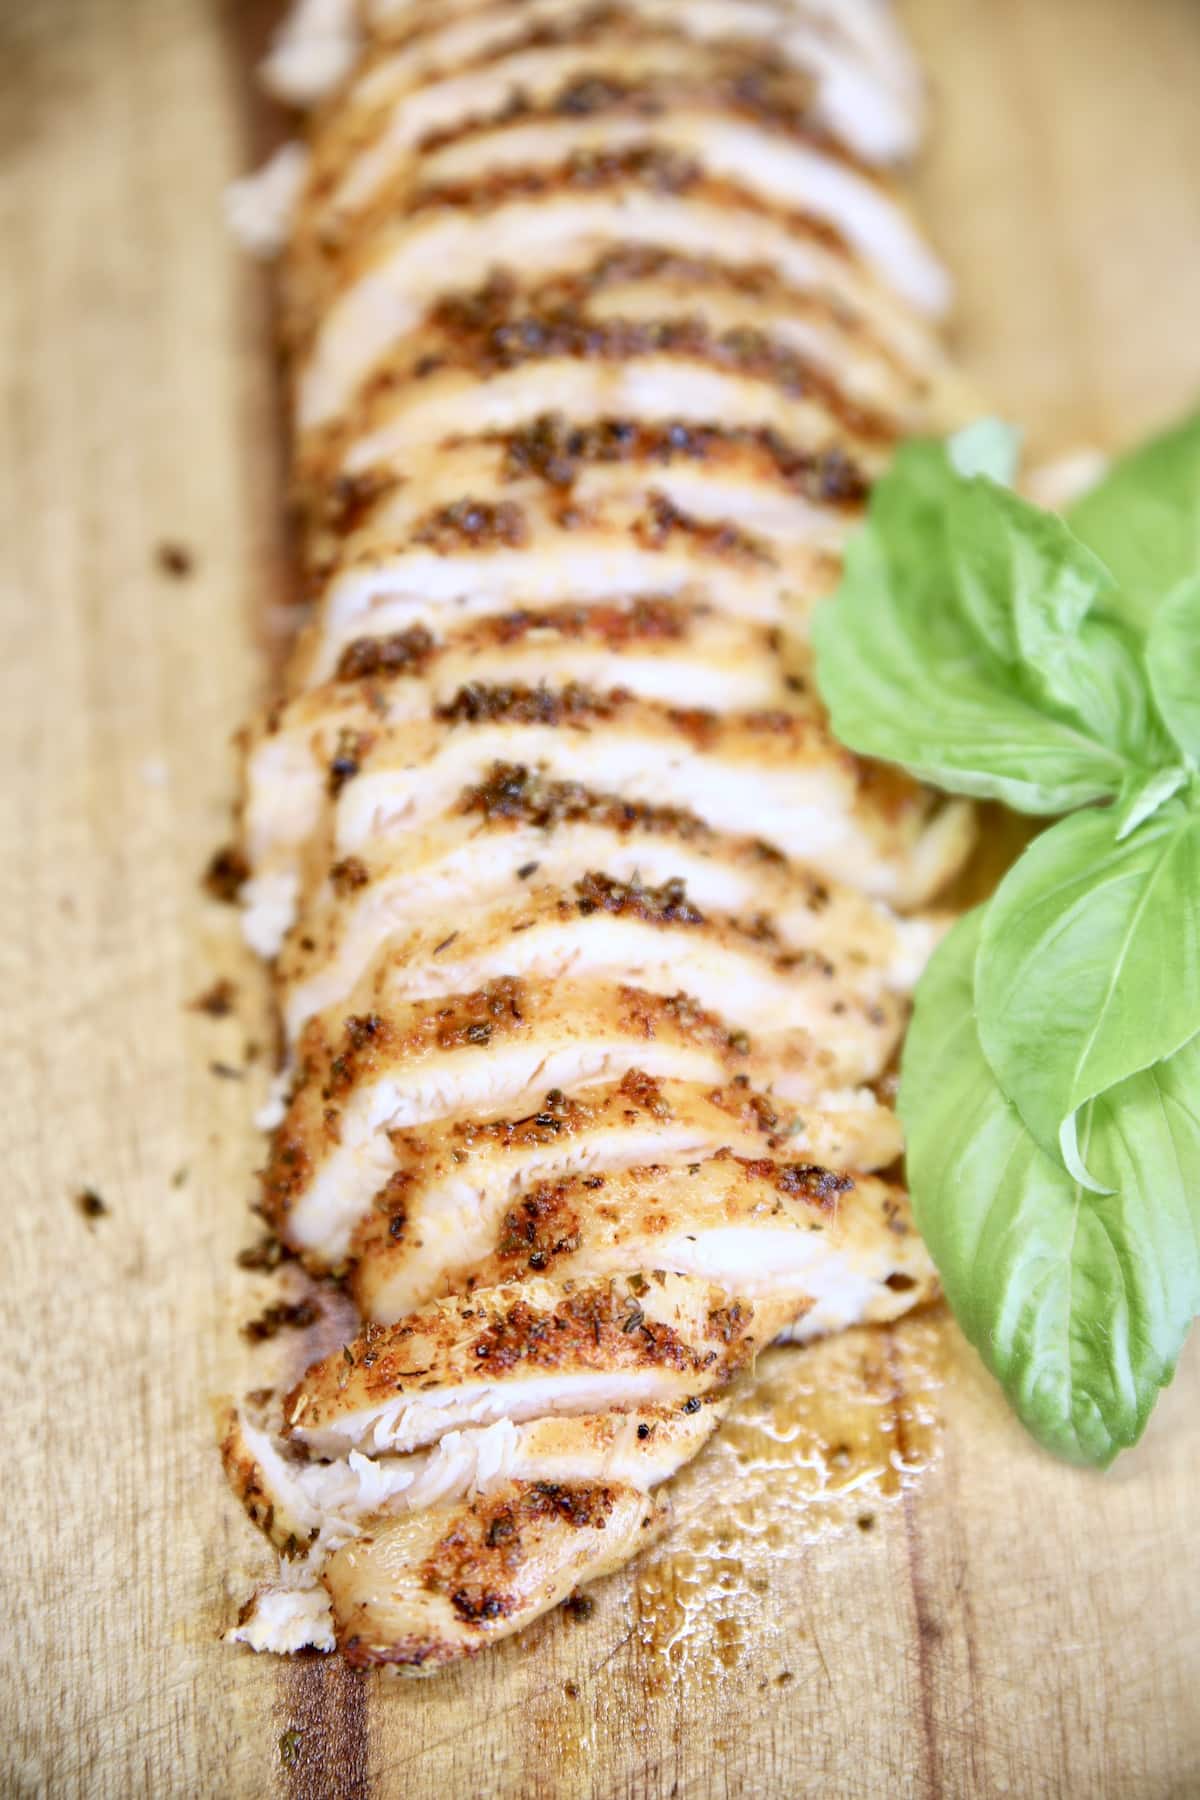 Sliced chicken with fresh basil leaves.